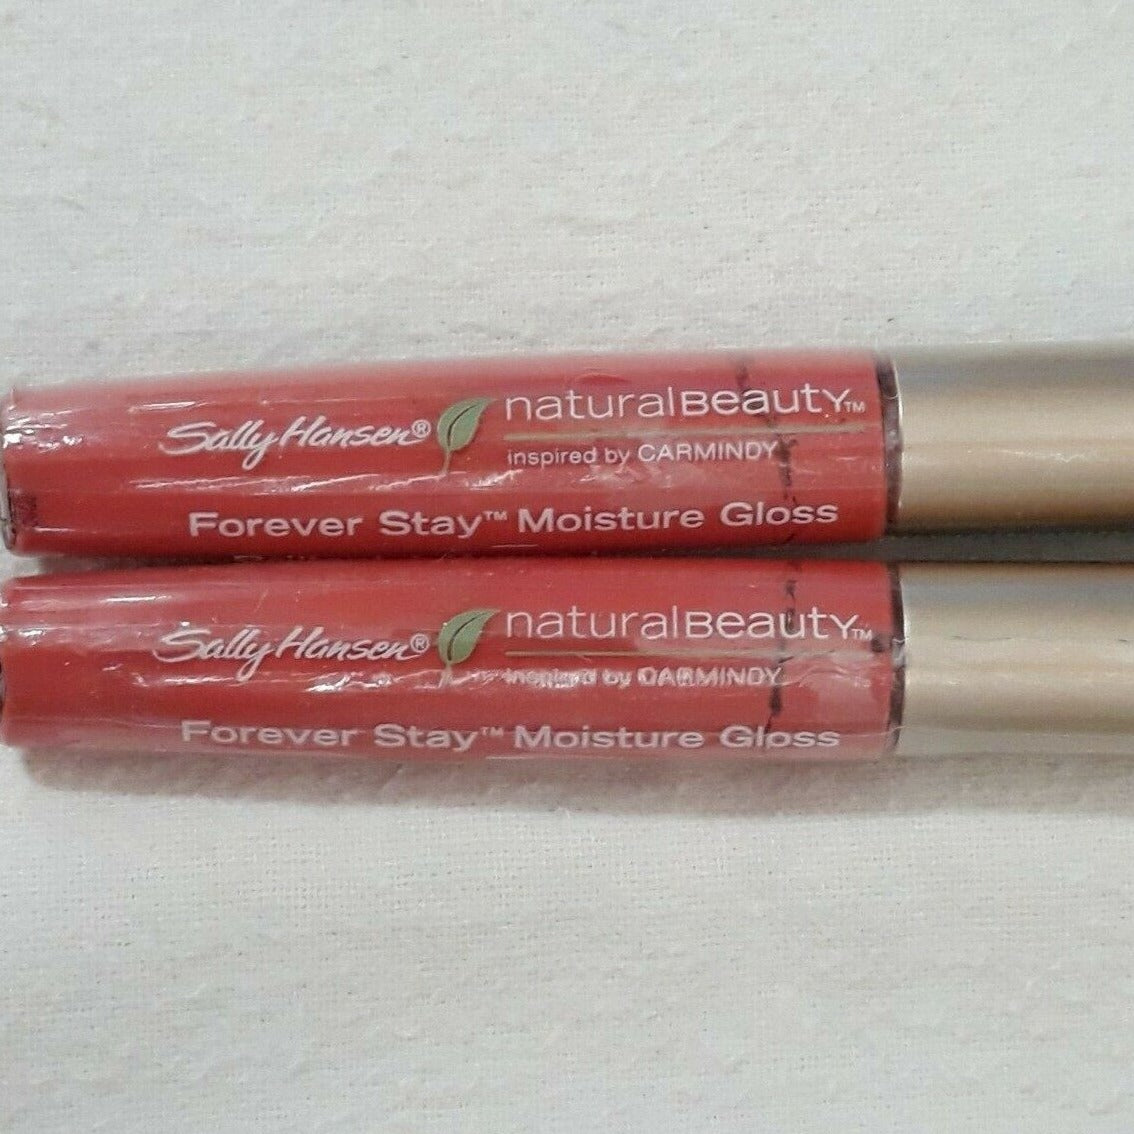 Sally Hansen Natural Beauty Forever Stay Moisture Gloss In Creamsicle